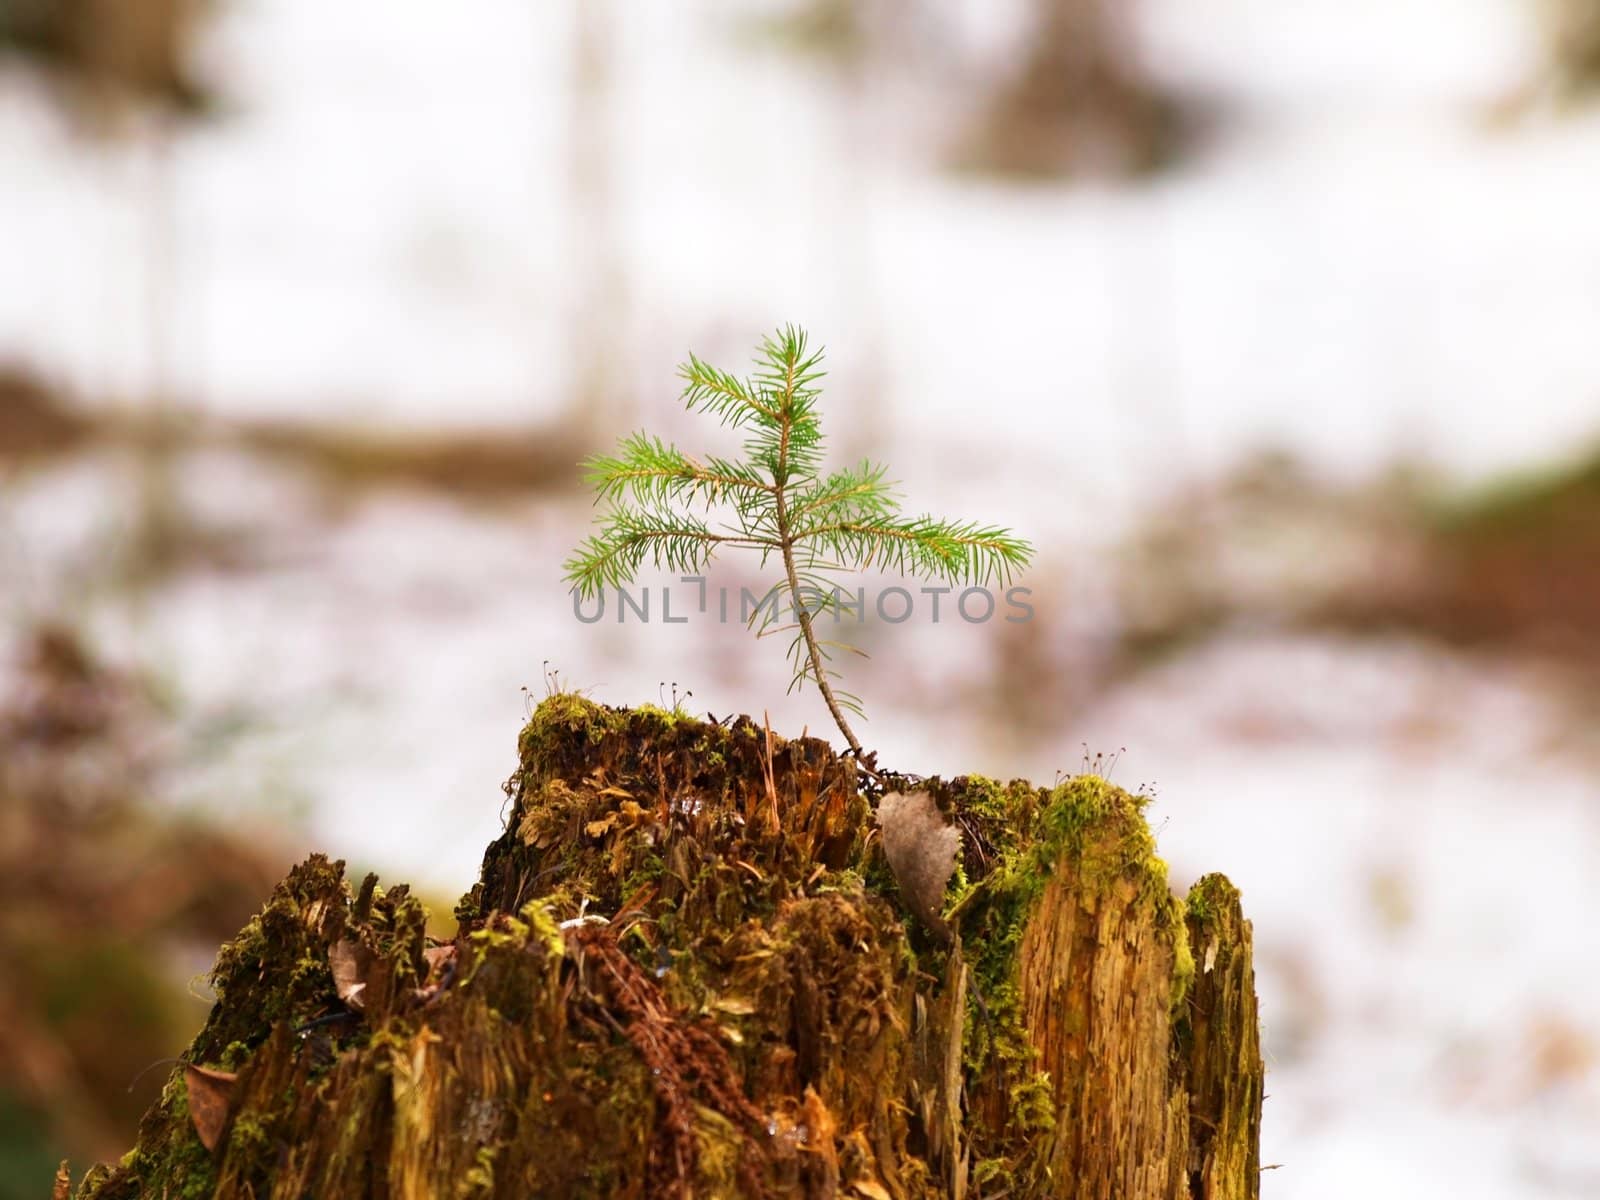 A little spruce tree growing on top of a old rotten stem